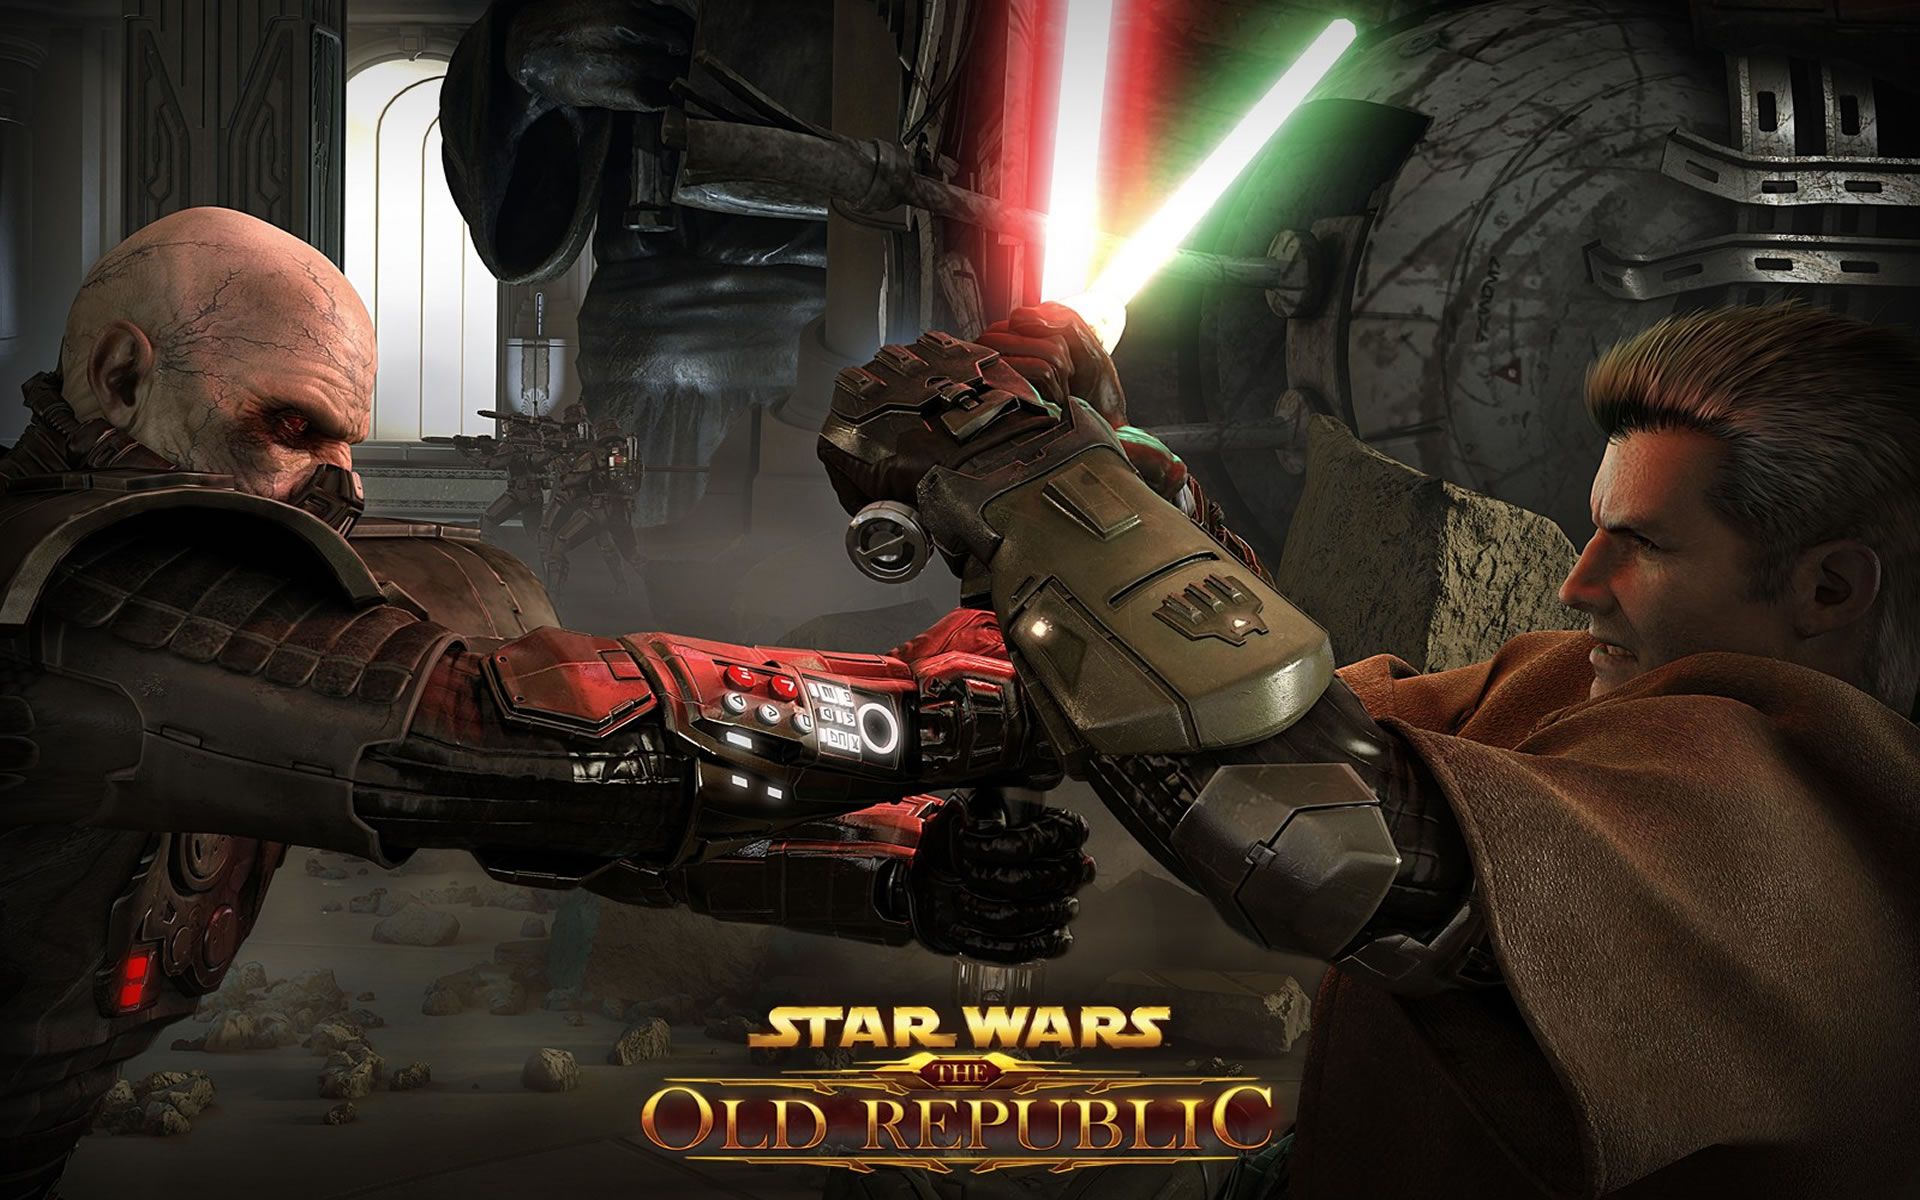 Sith And Jedi In Lightsaber Fight Wars The Old Republic Wallpaper